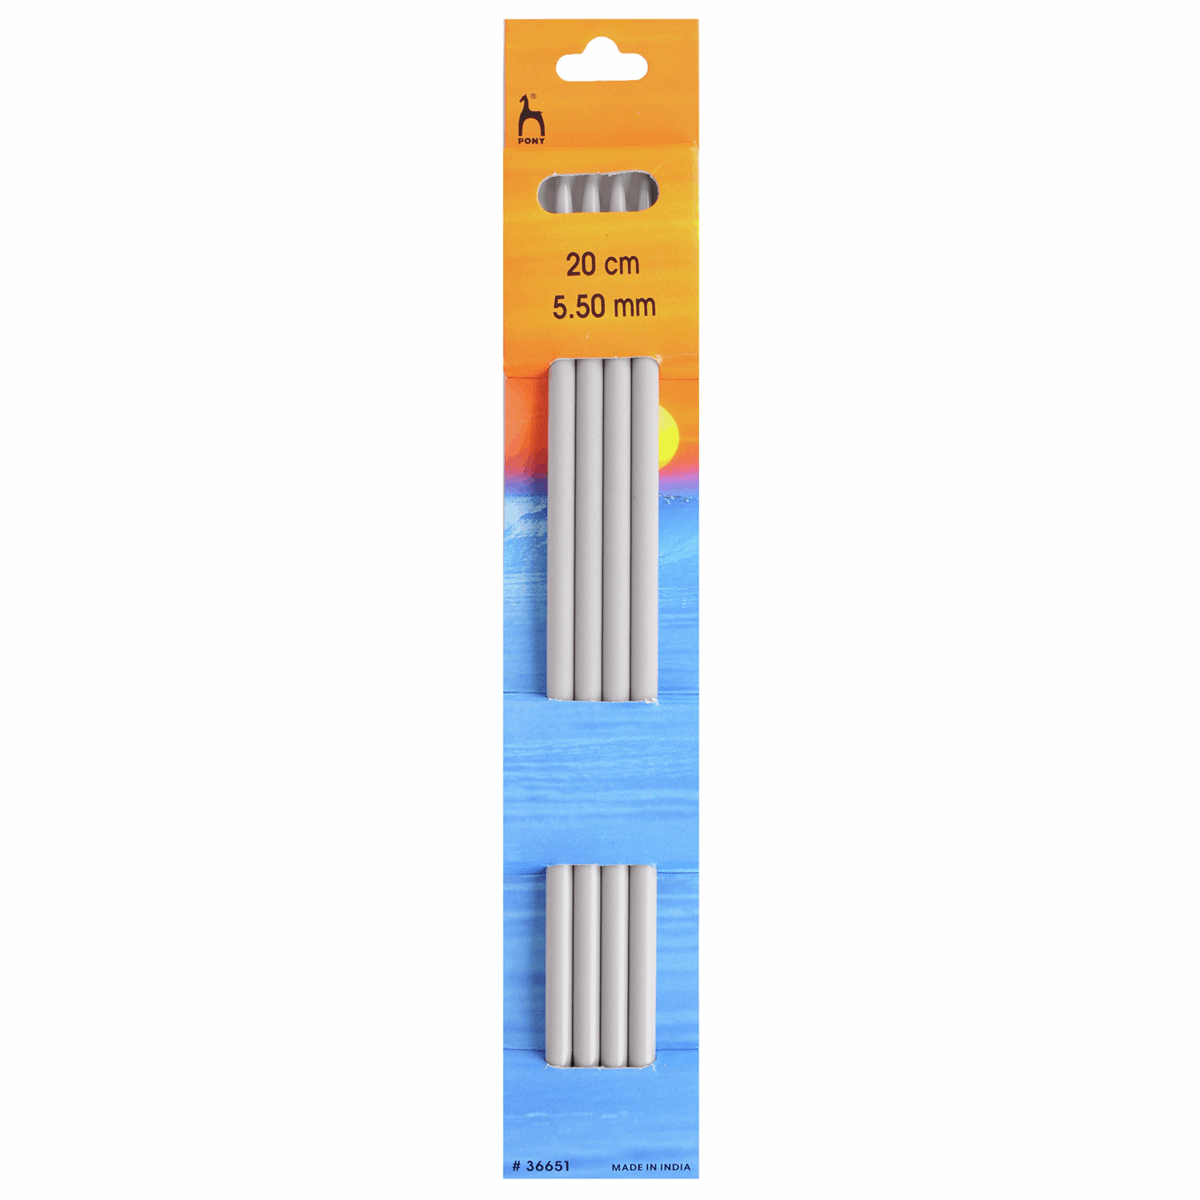 PONY Double-Ended Knitting Pins - 20cm x 5.50mm (Set of 4)